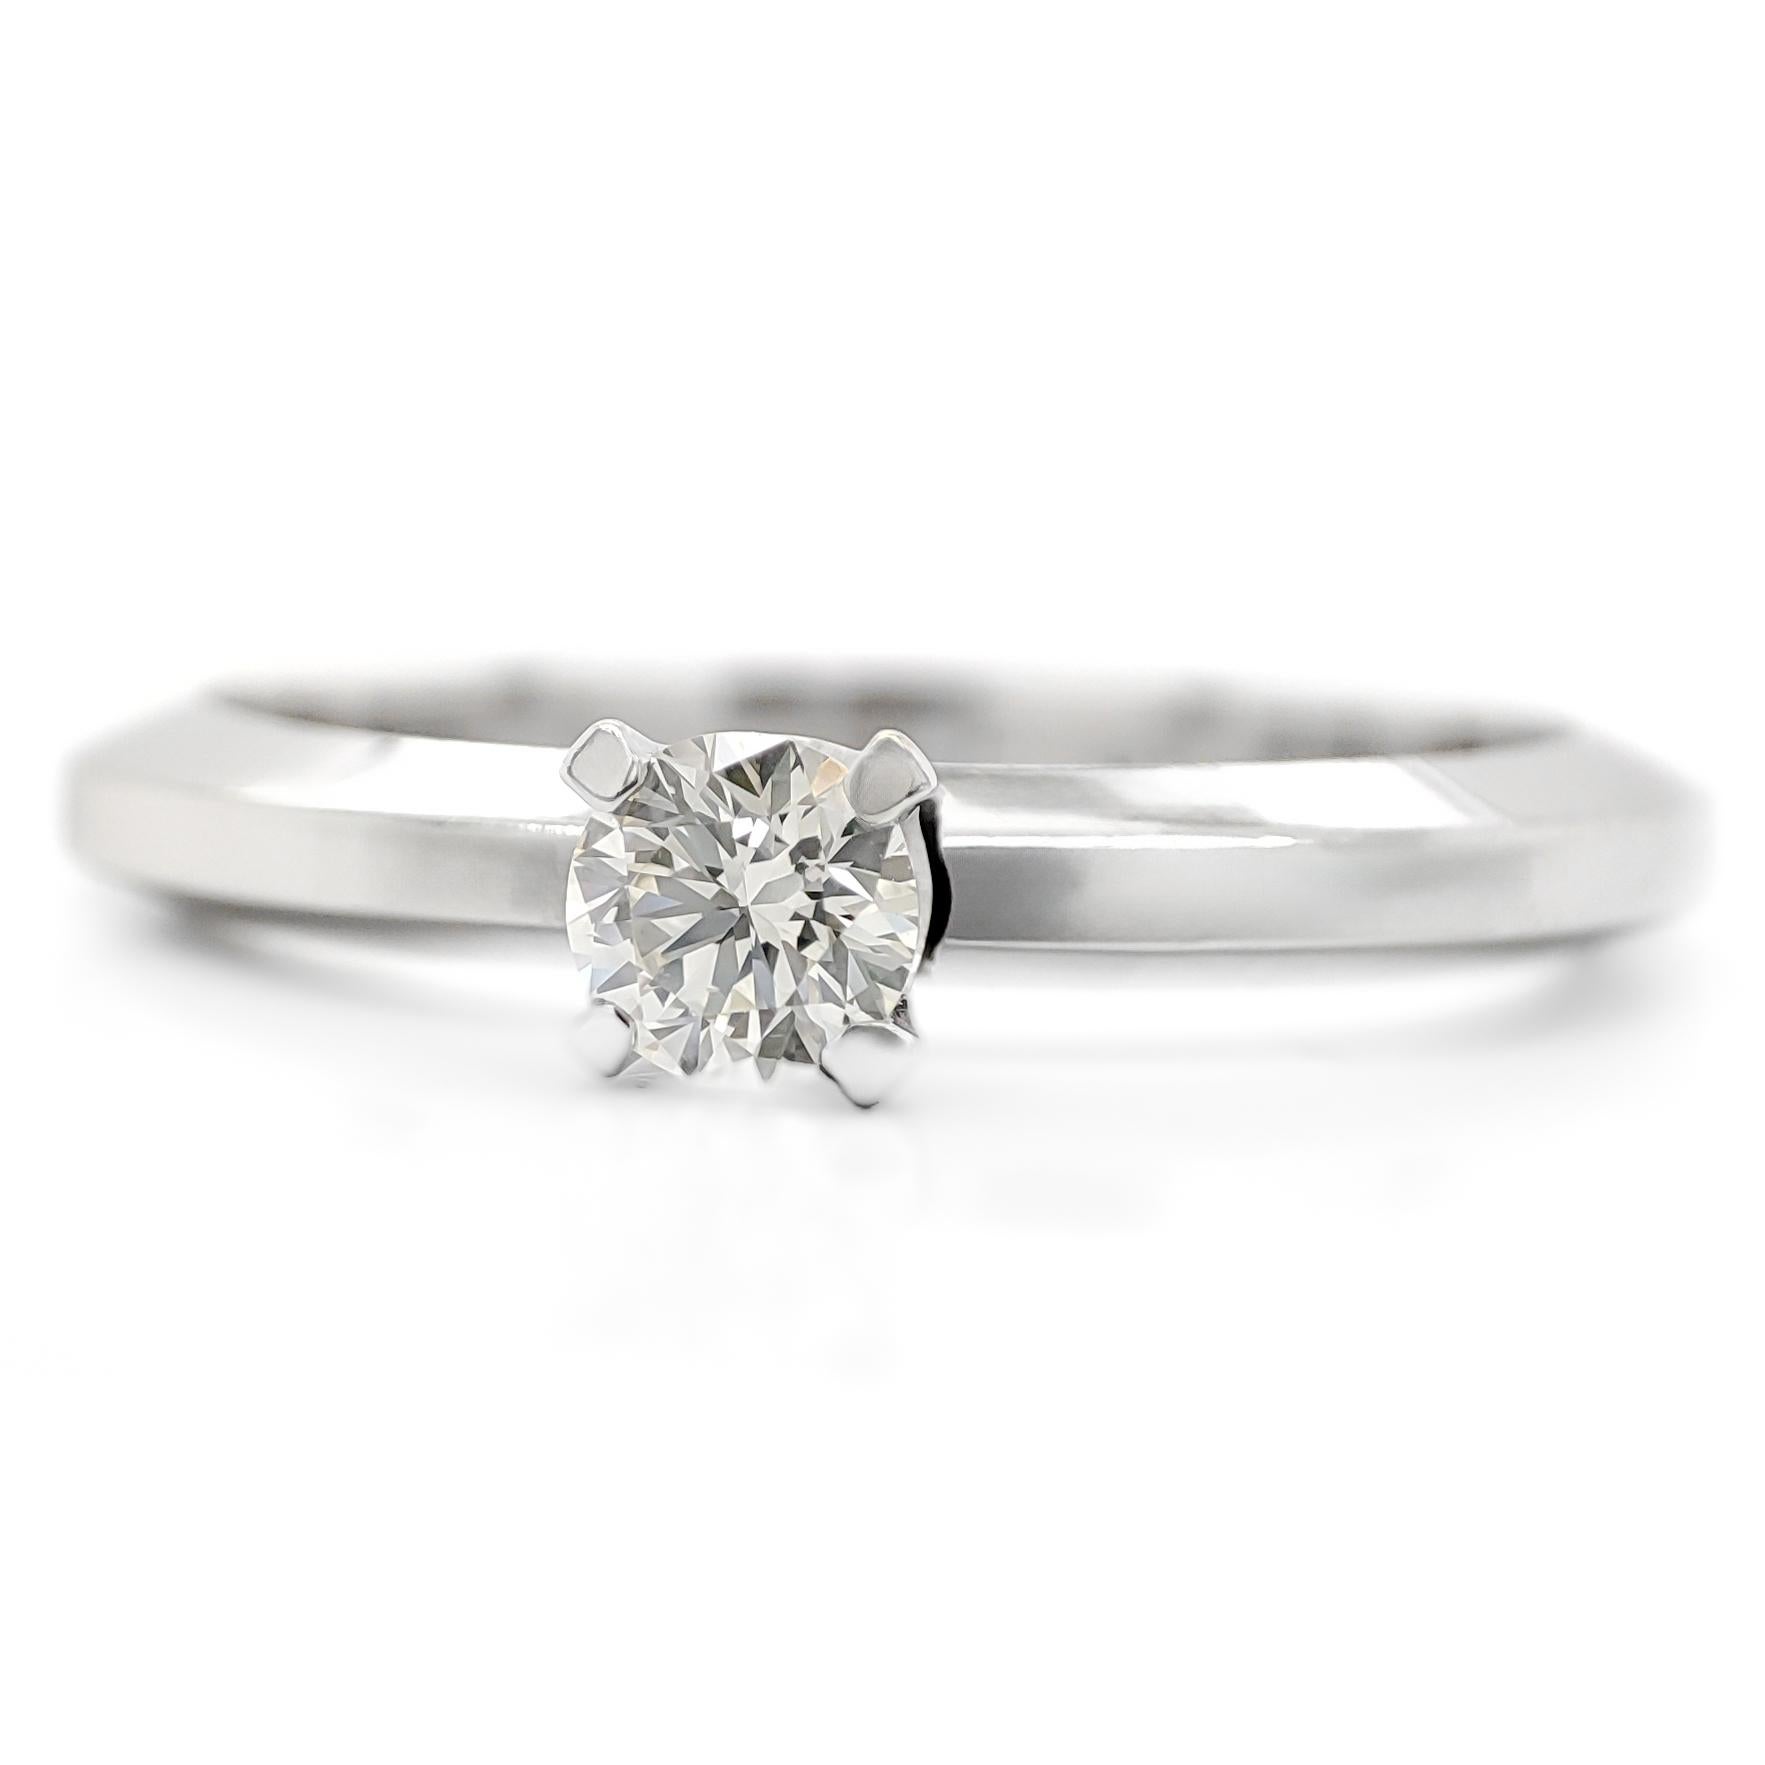 FOR US BUYER NO VAT

This solitaire engagement ring is a timeless symbol of your love and commitment. It features a brilliant 0.20 carat round diamond as its centerpiece, radiating its captivating and enduring sparkle.

The ring is crafted in 14K